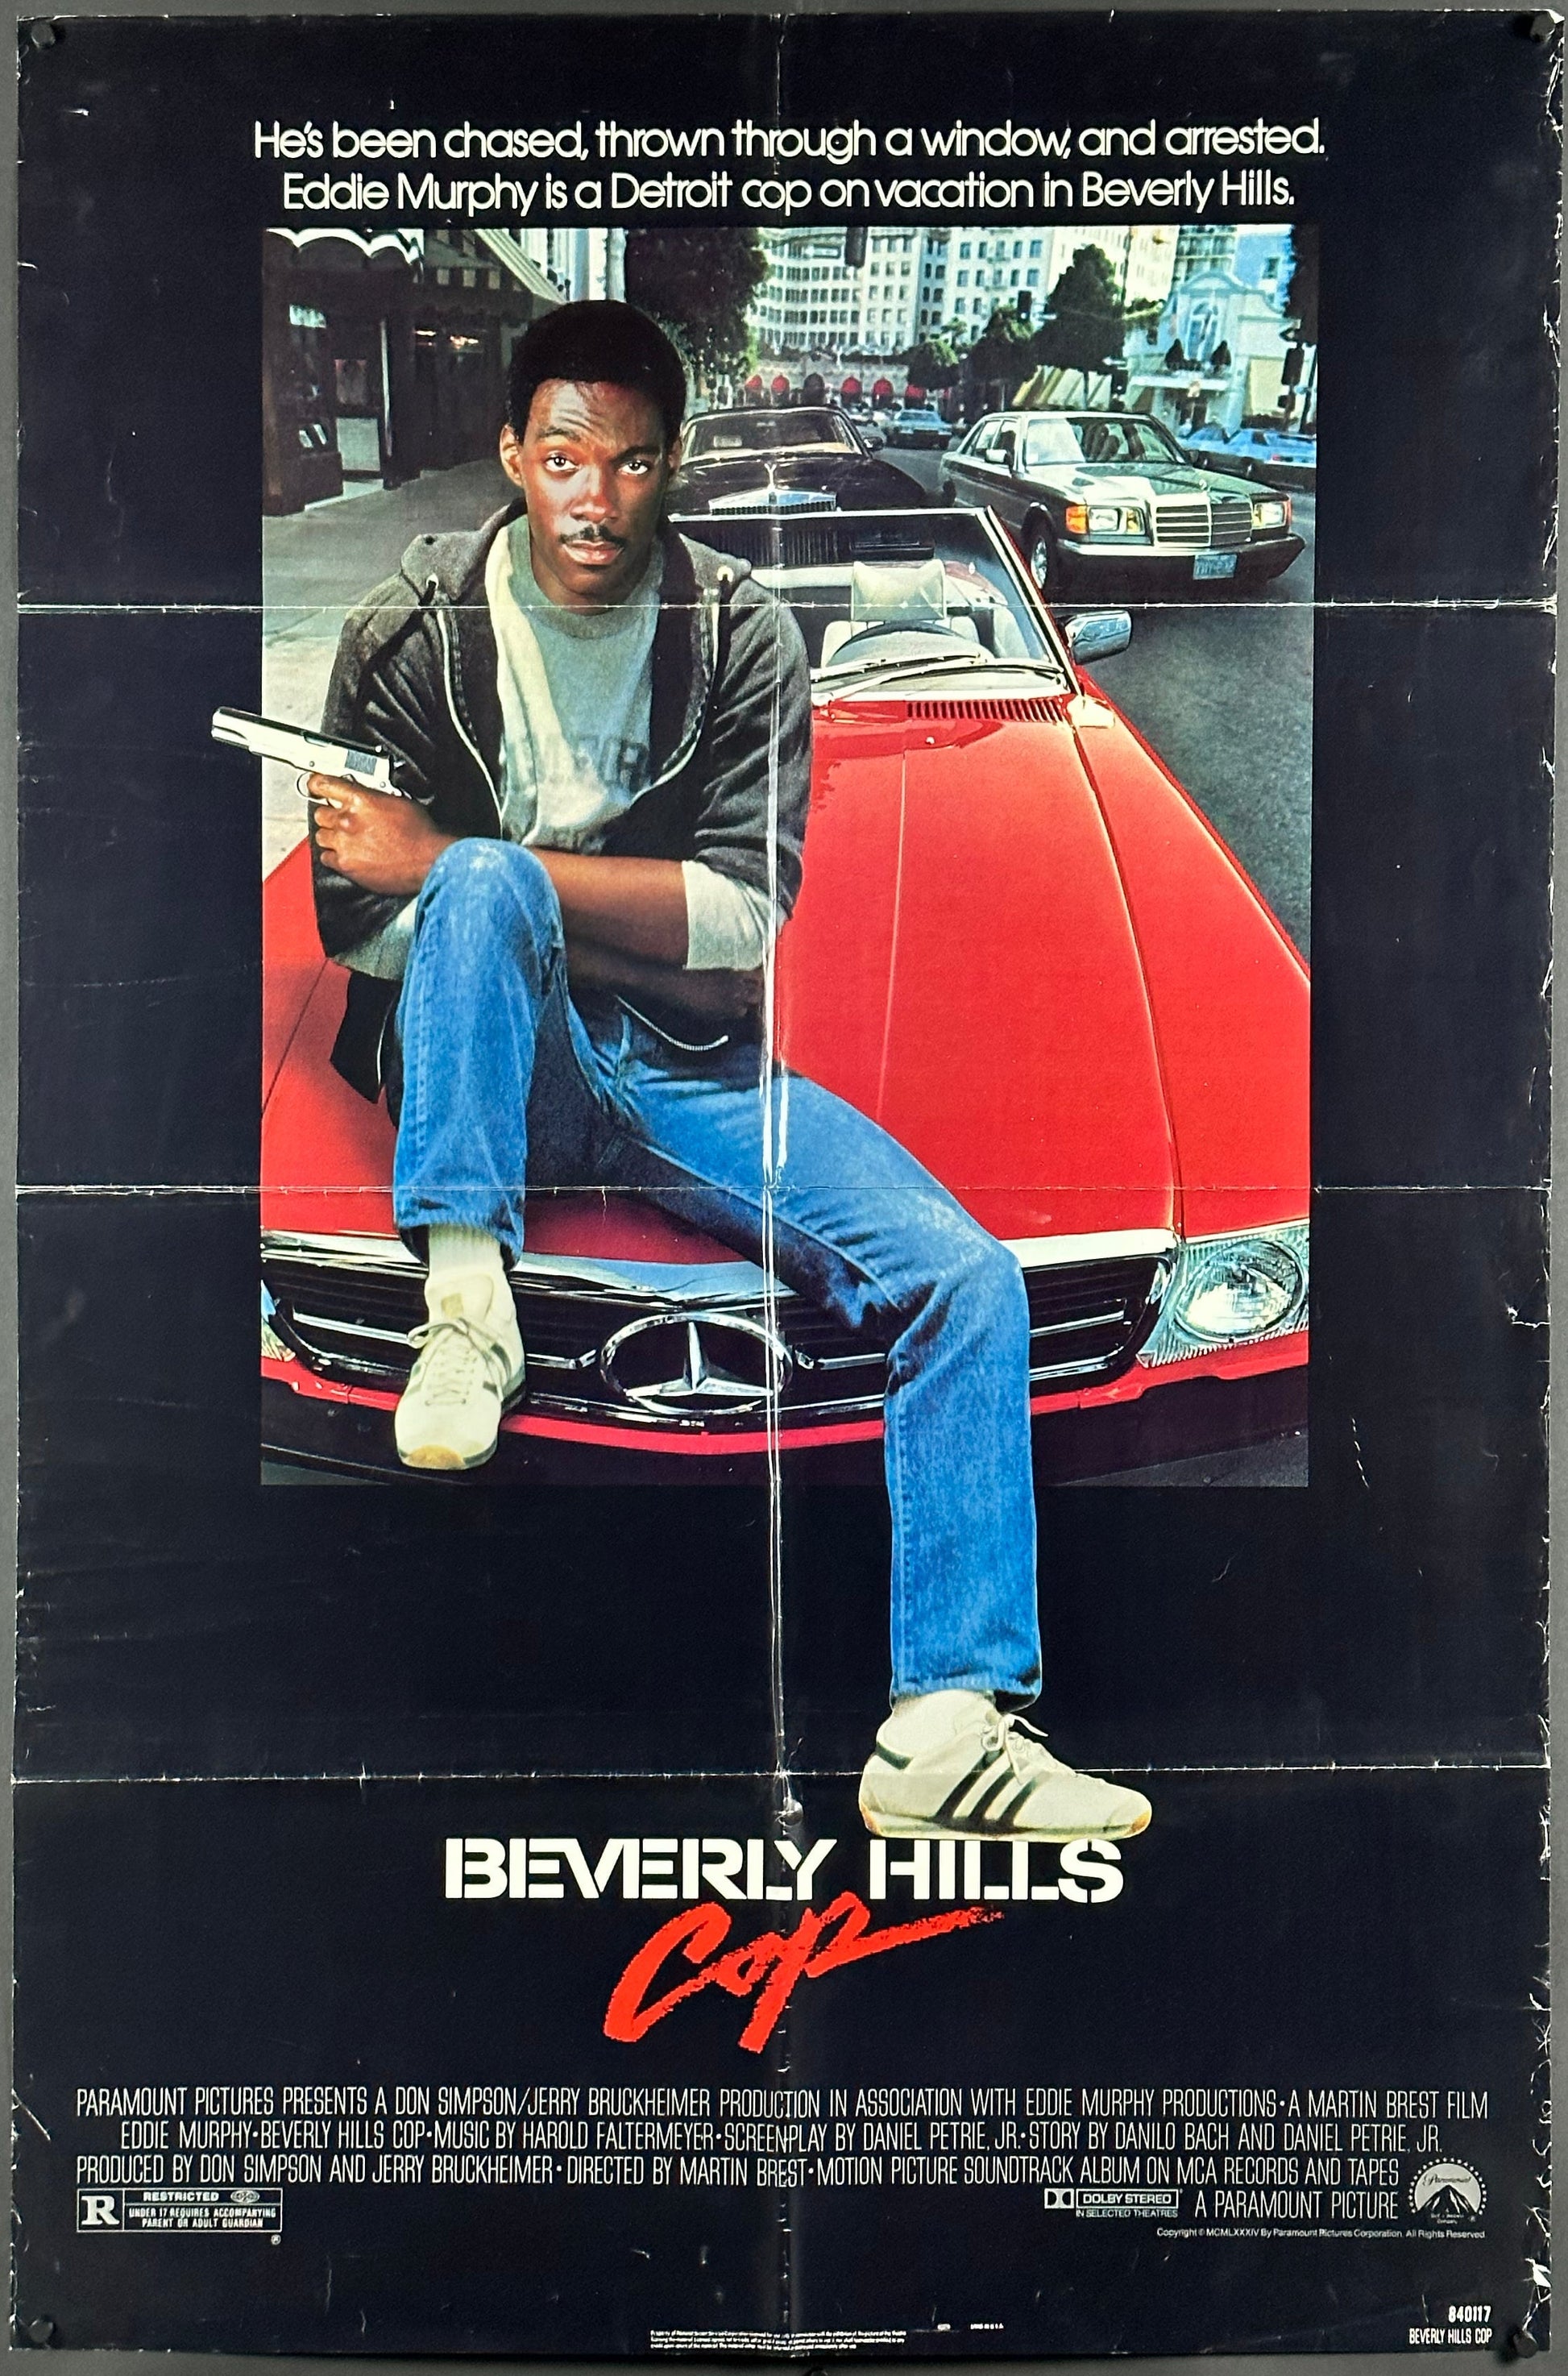 Beverly Hills Cop US One Sheet (1984) - ORIGINAL RELEASE - posterpalace.com